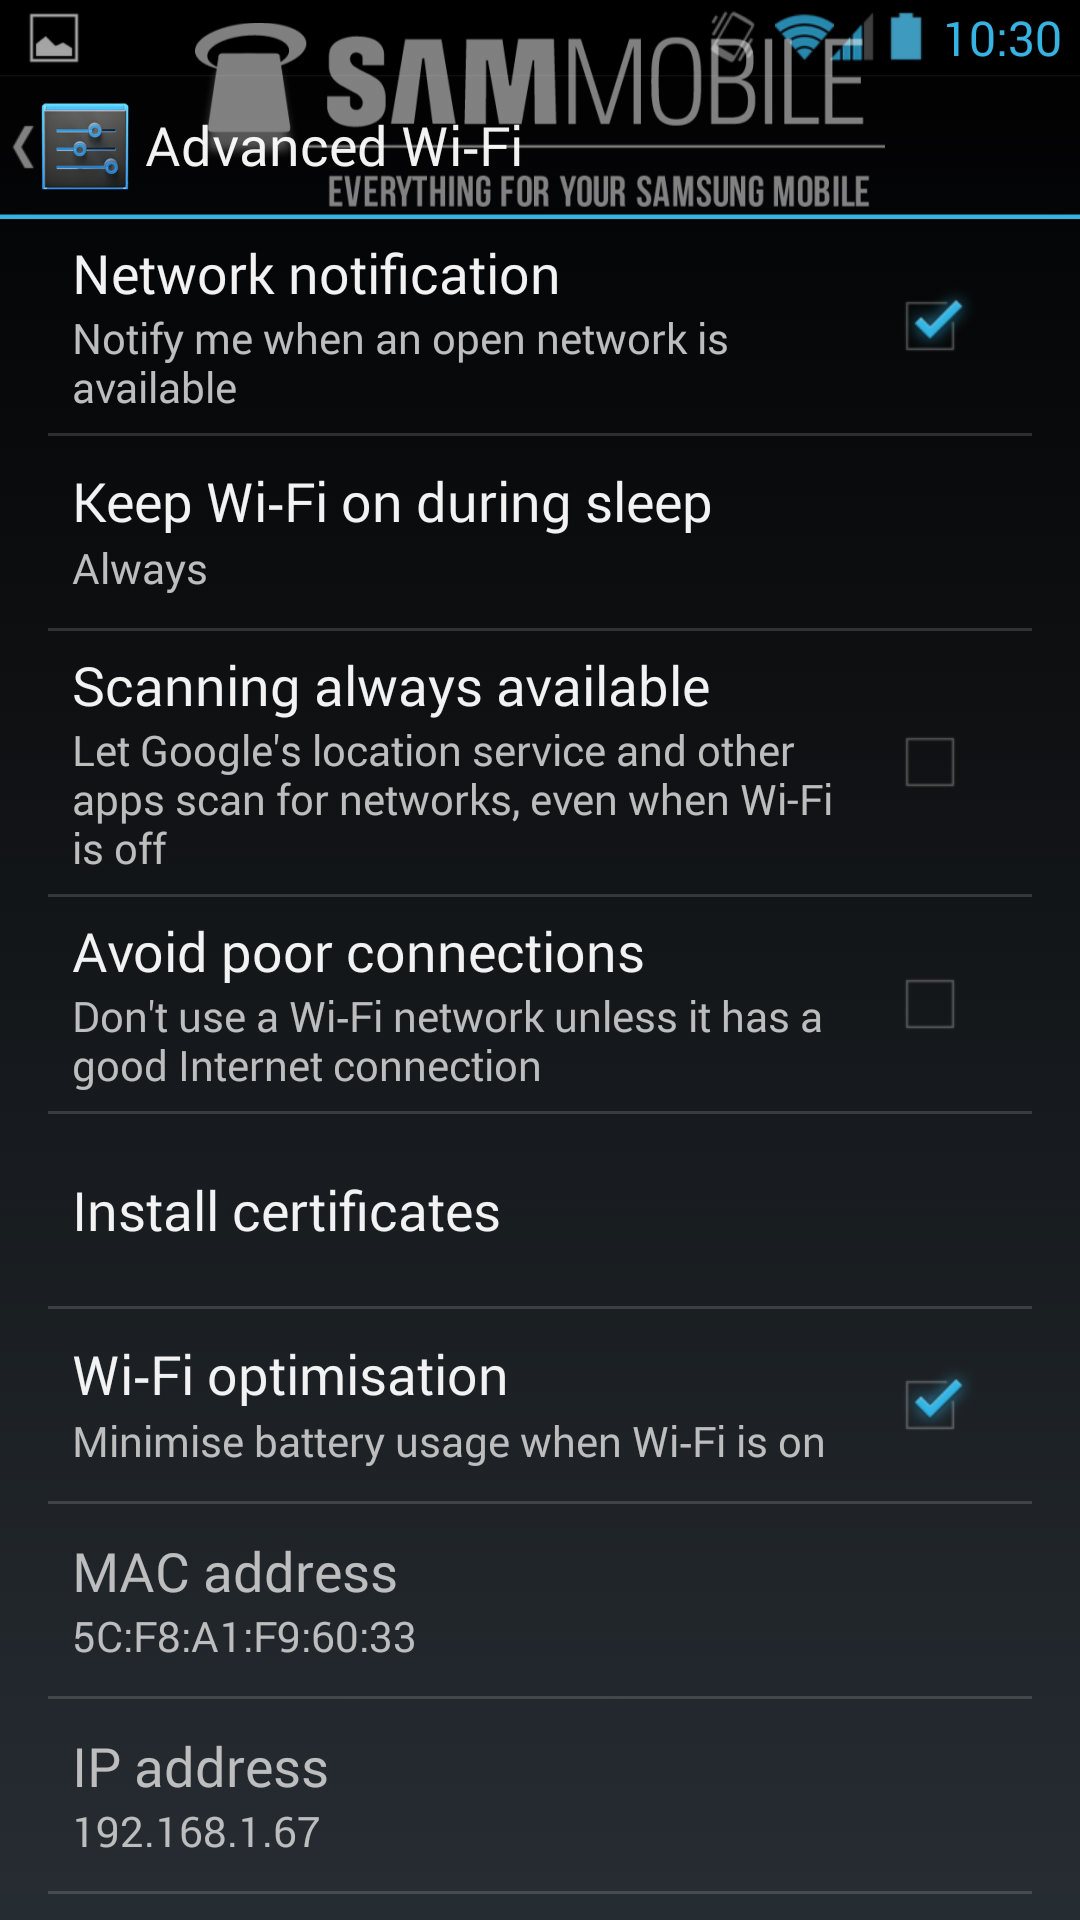 Android 4.3 ROM advanced Wi-Fi